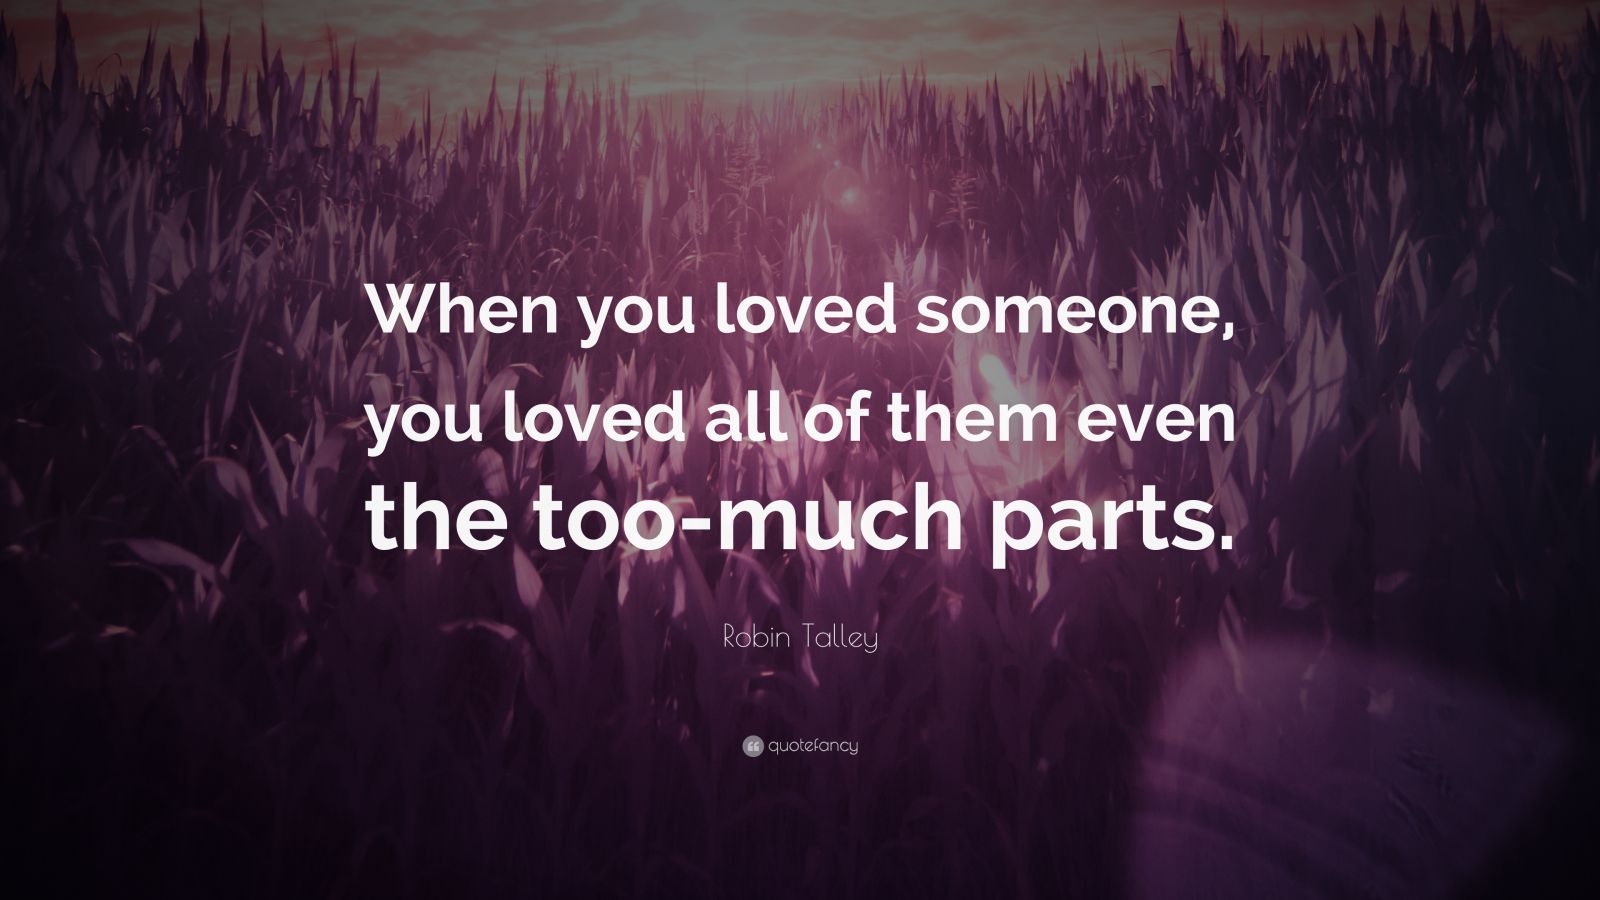 Robin Talley Quote: “When you loved someone, you loved all of them even ...